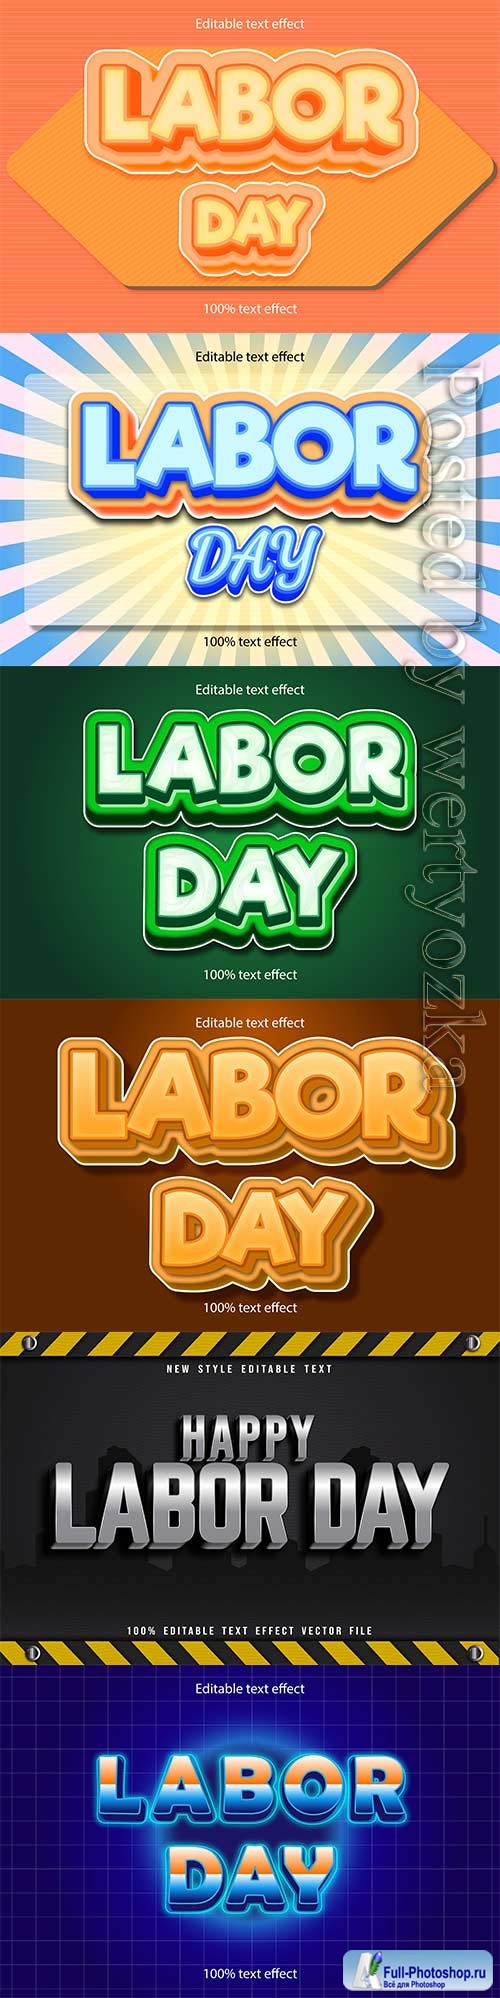 Labor day editable text effect vol 10